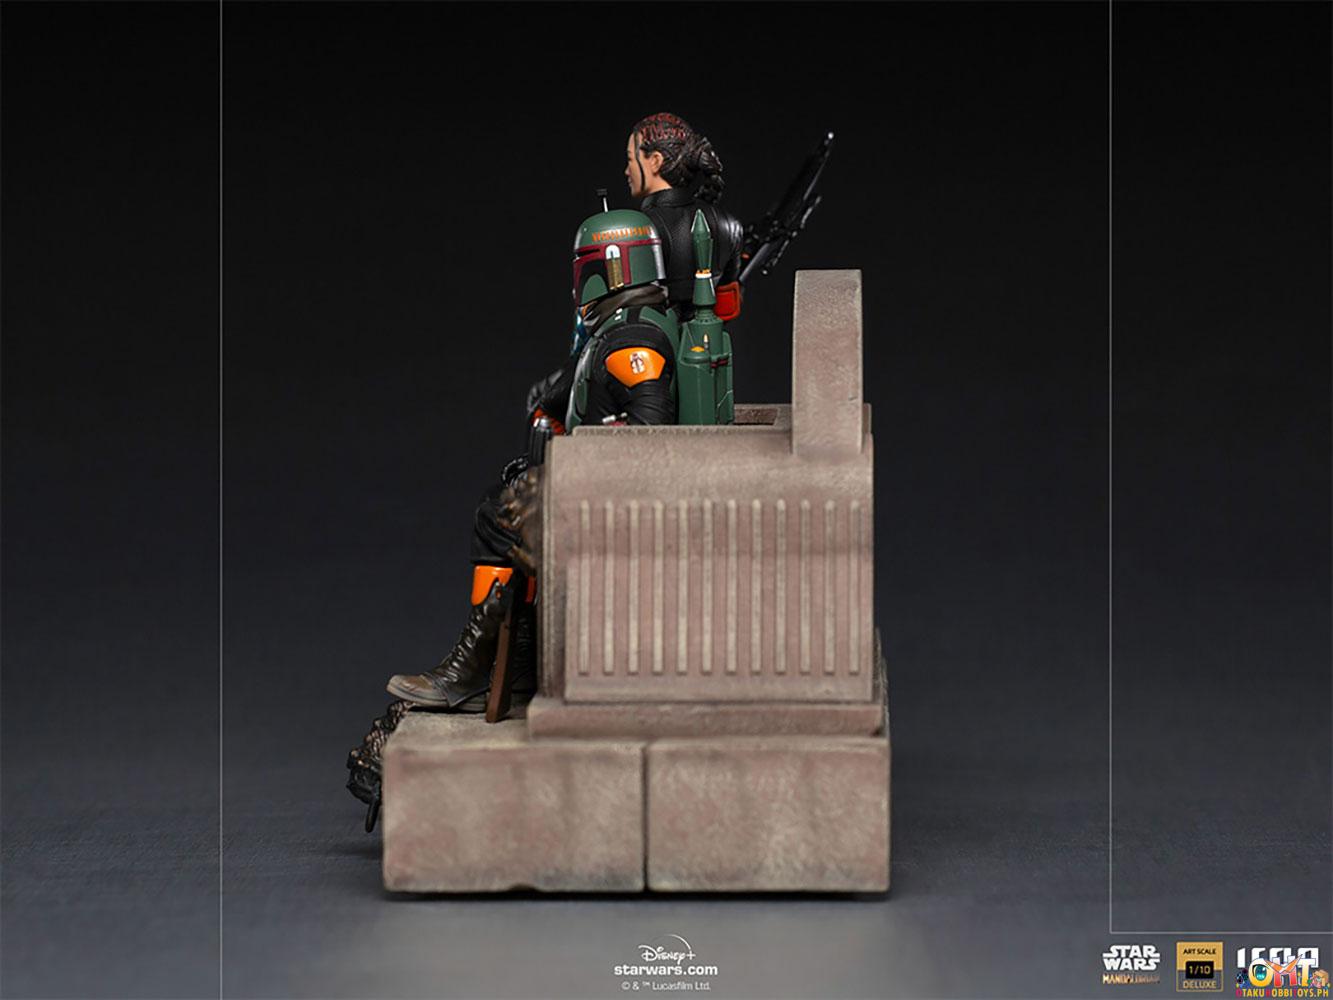 Iron Studios 1/10 Boba Fett and Fennec Shand on Throne Deluxe Art Scale - The Mandalorian